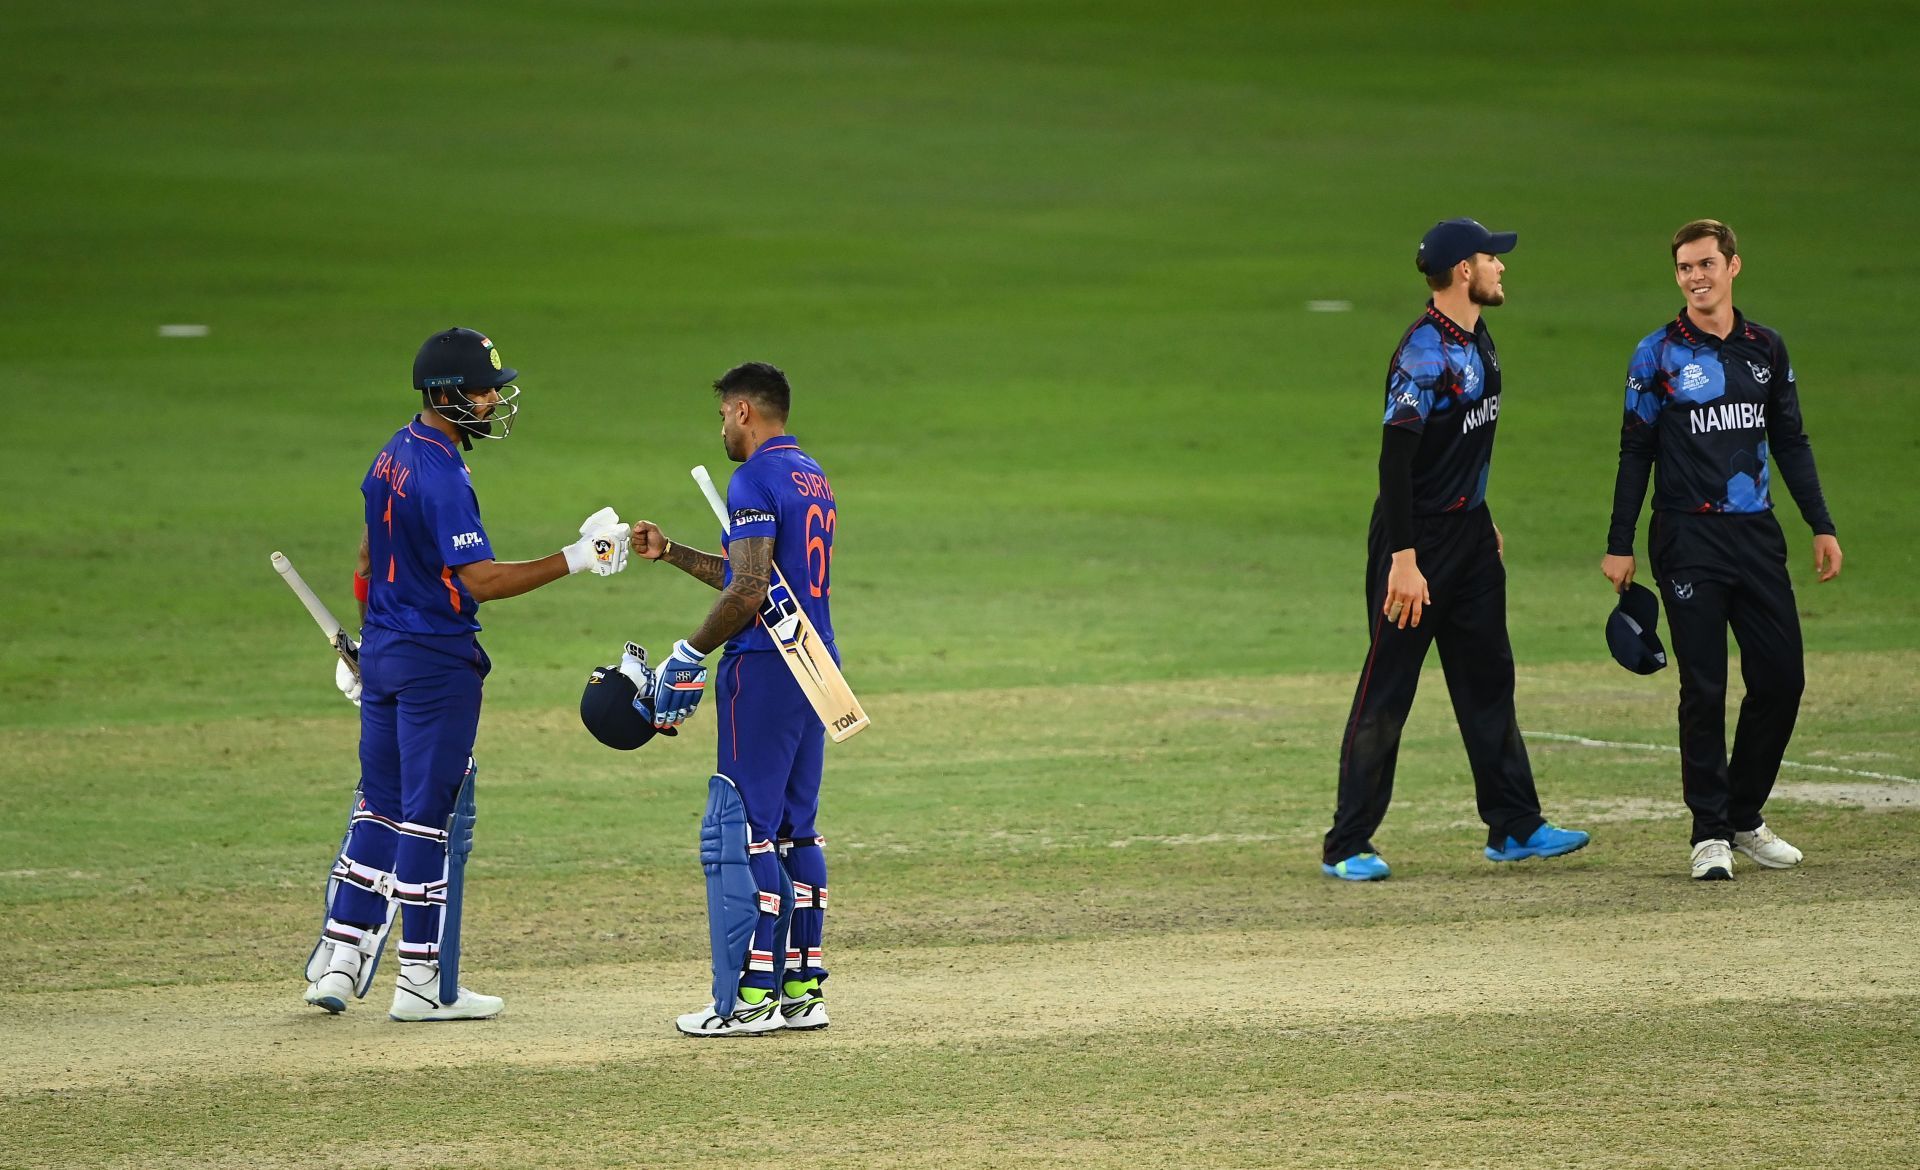 India finished their tournament on a high with a win over Namibia